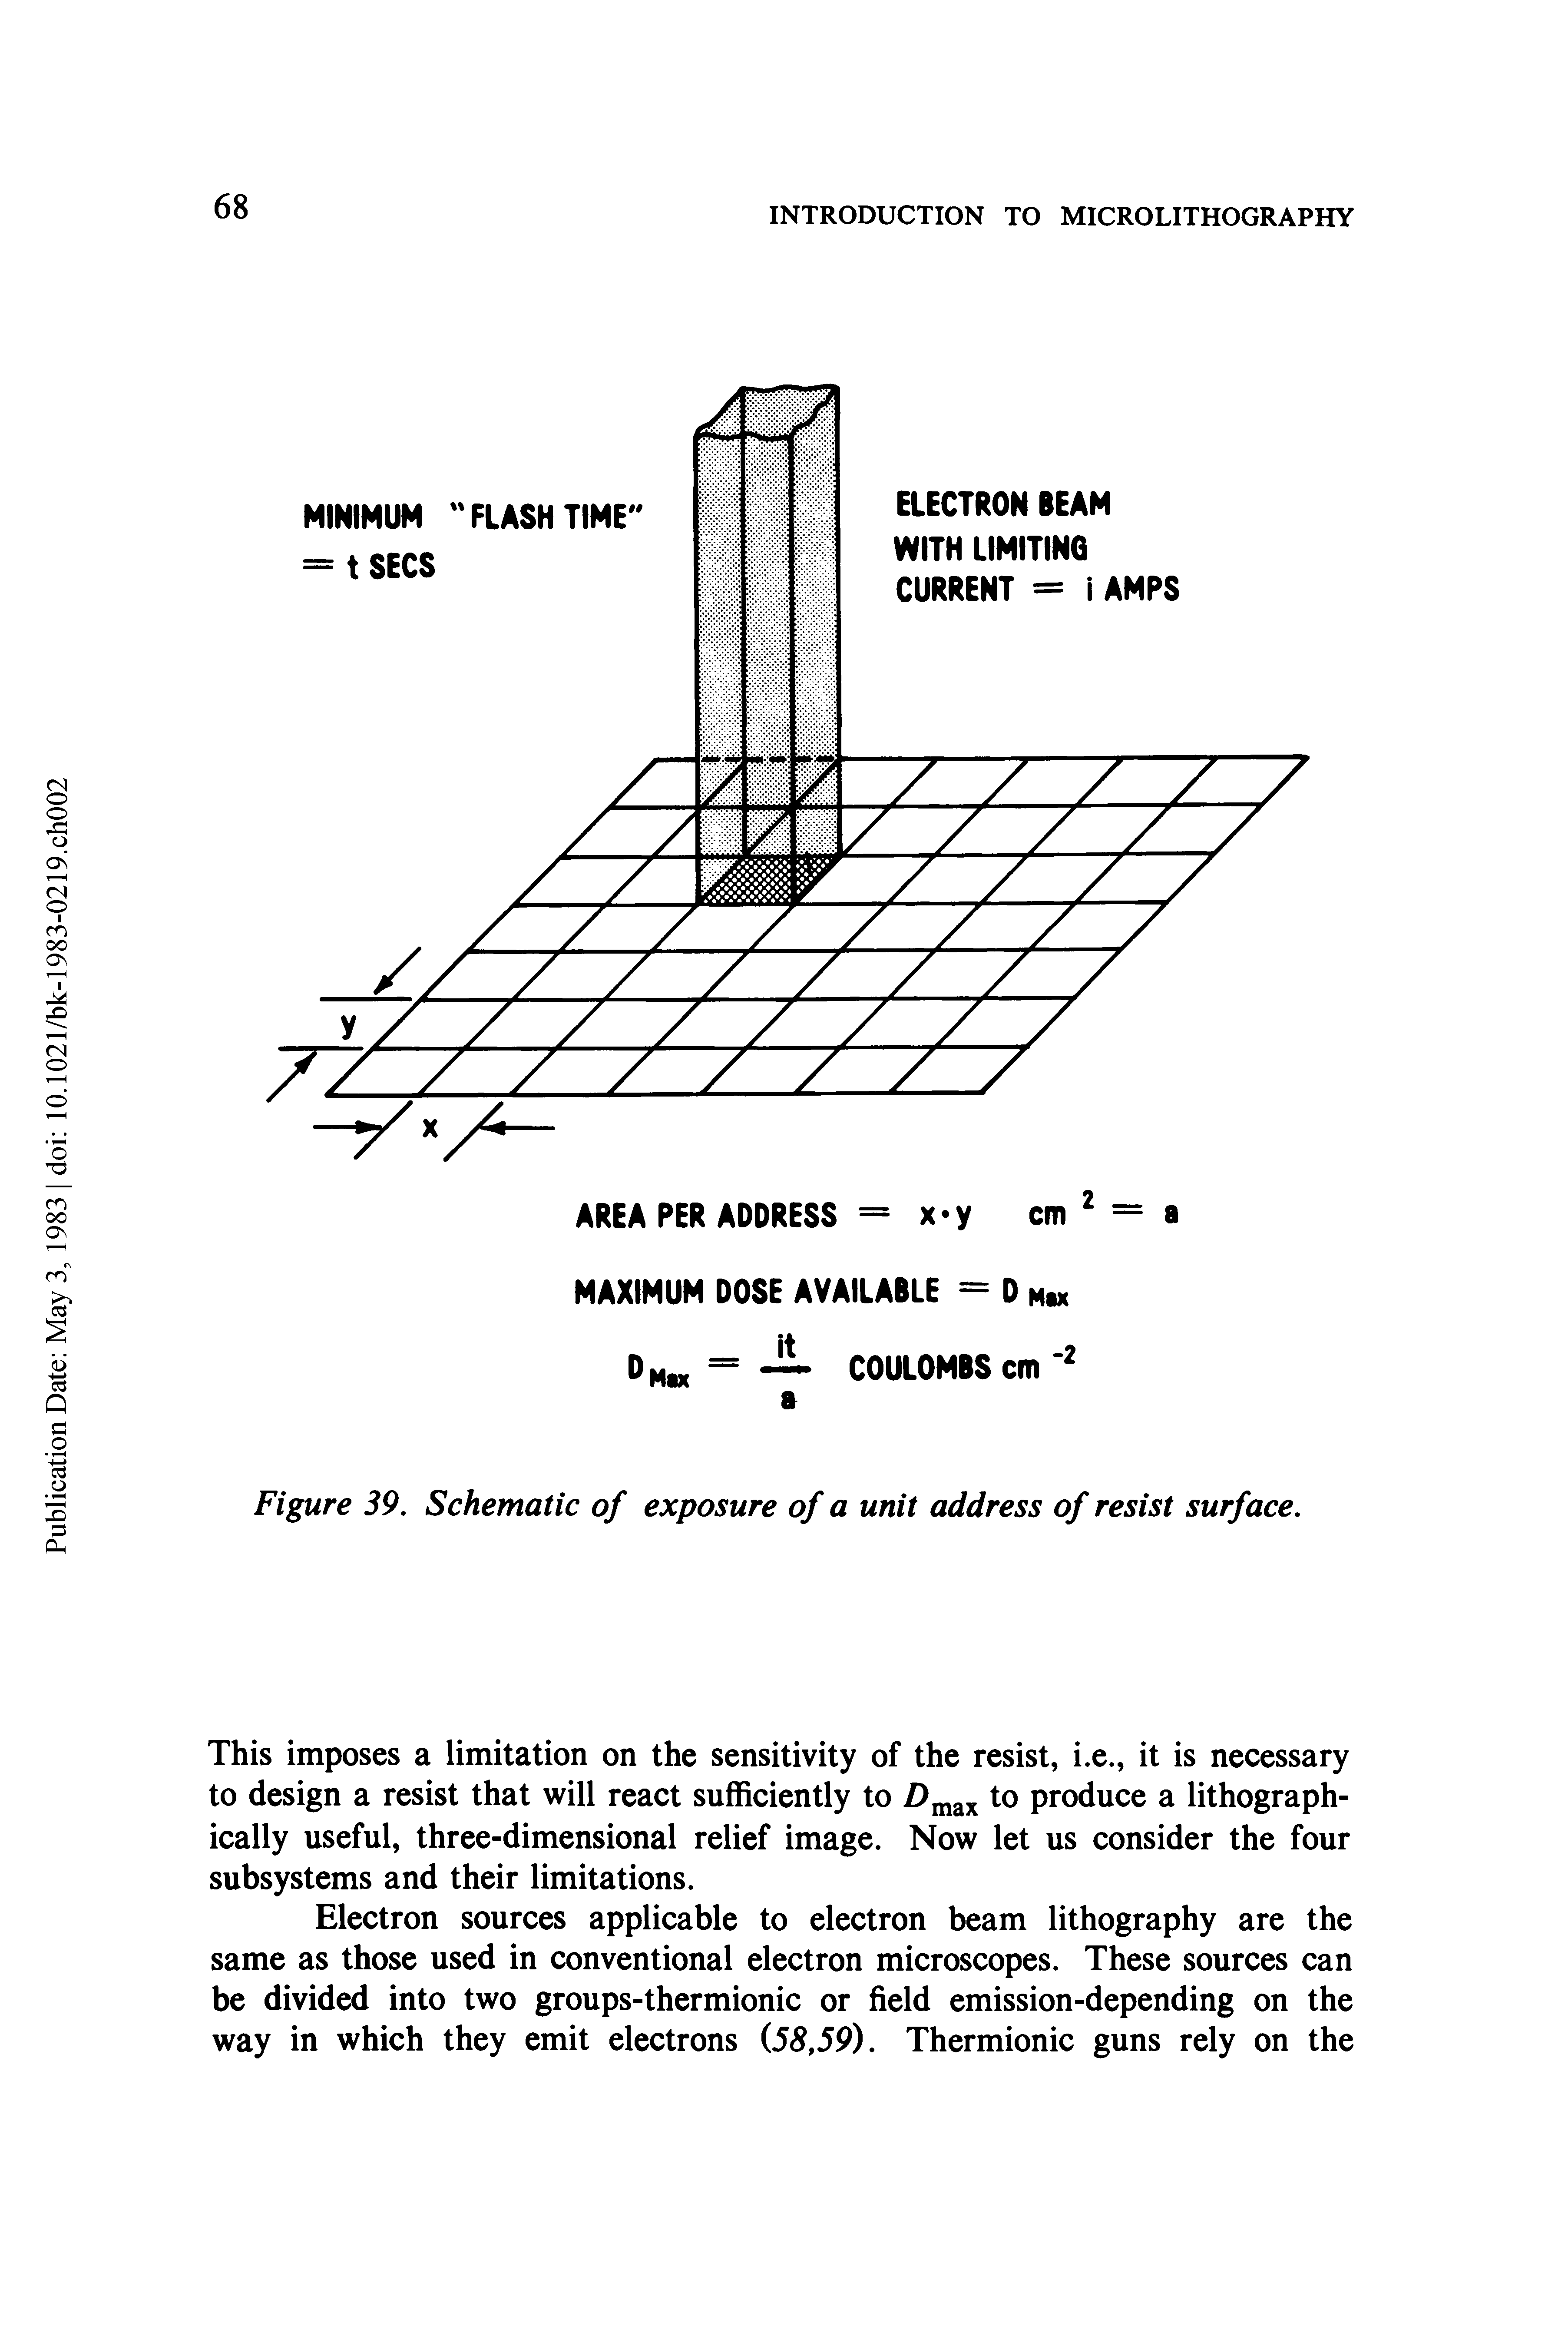 Figure 39. Schematic of exposure of a unit address of resist surface.